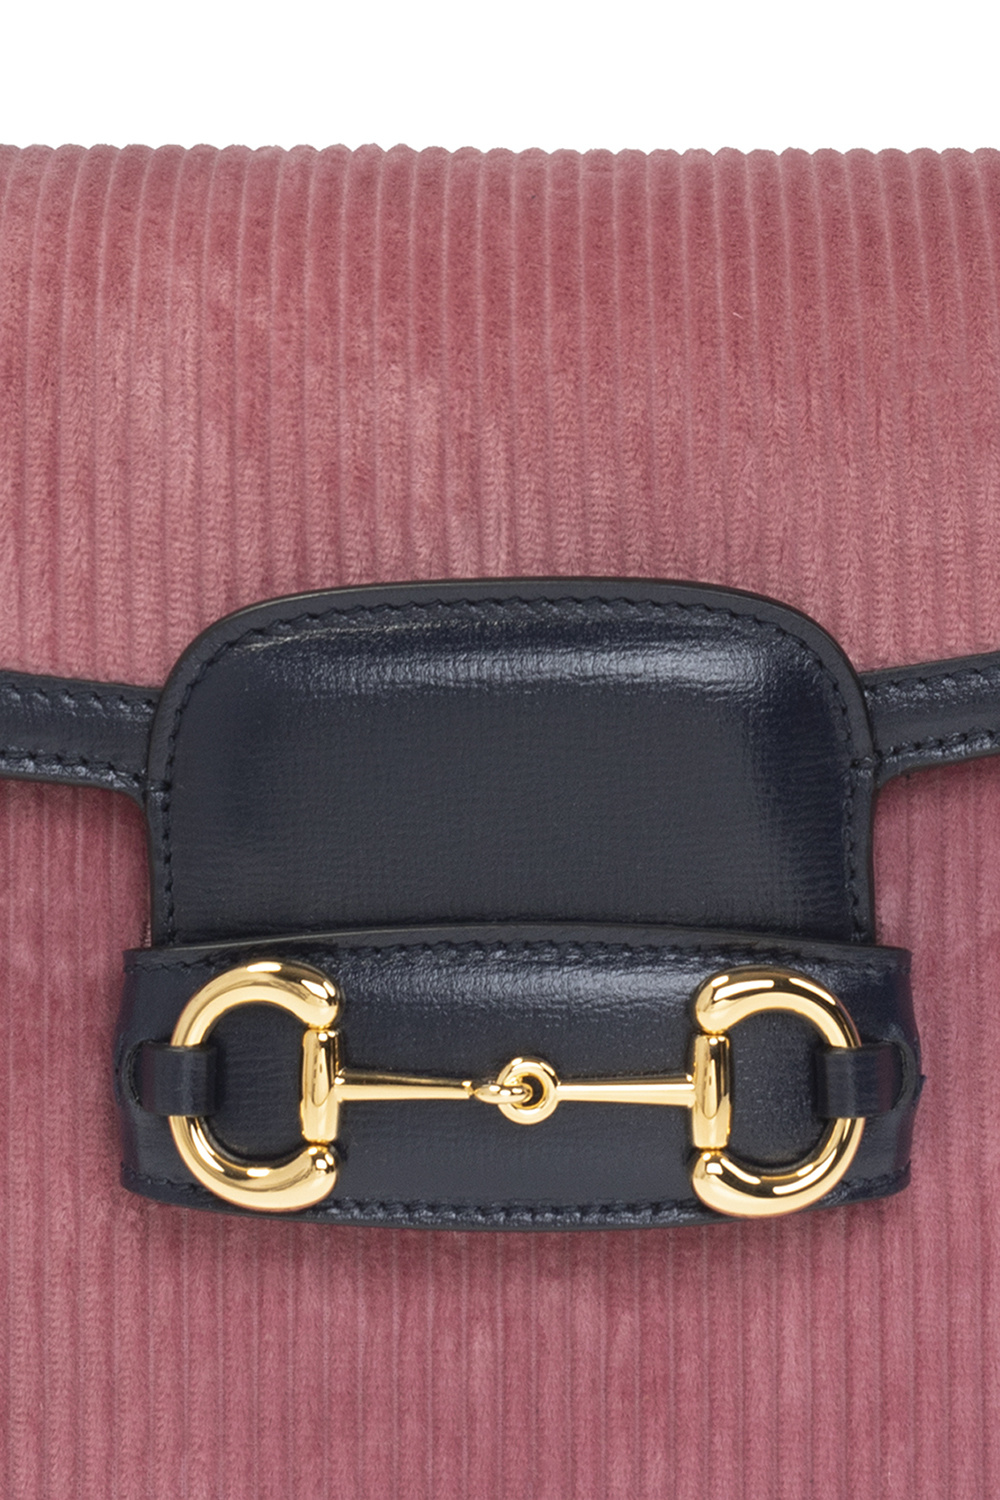 Horsebit 1955 Small' shoulder bag Gucci - IetpShops Luxembourg - You can  buy the python version of the Gucci bag for